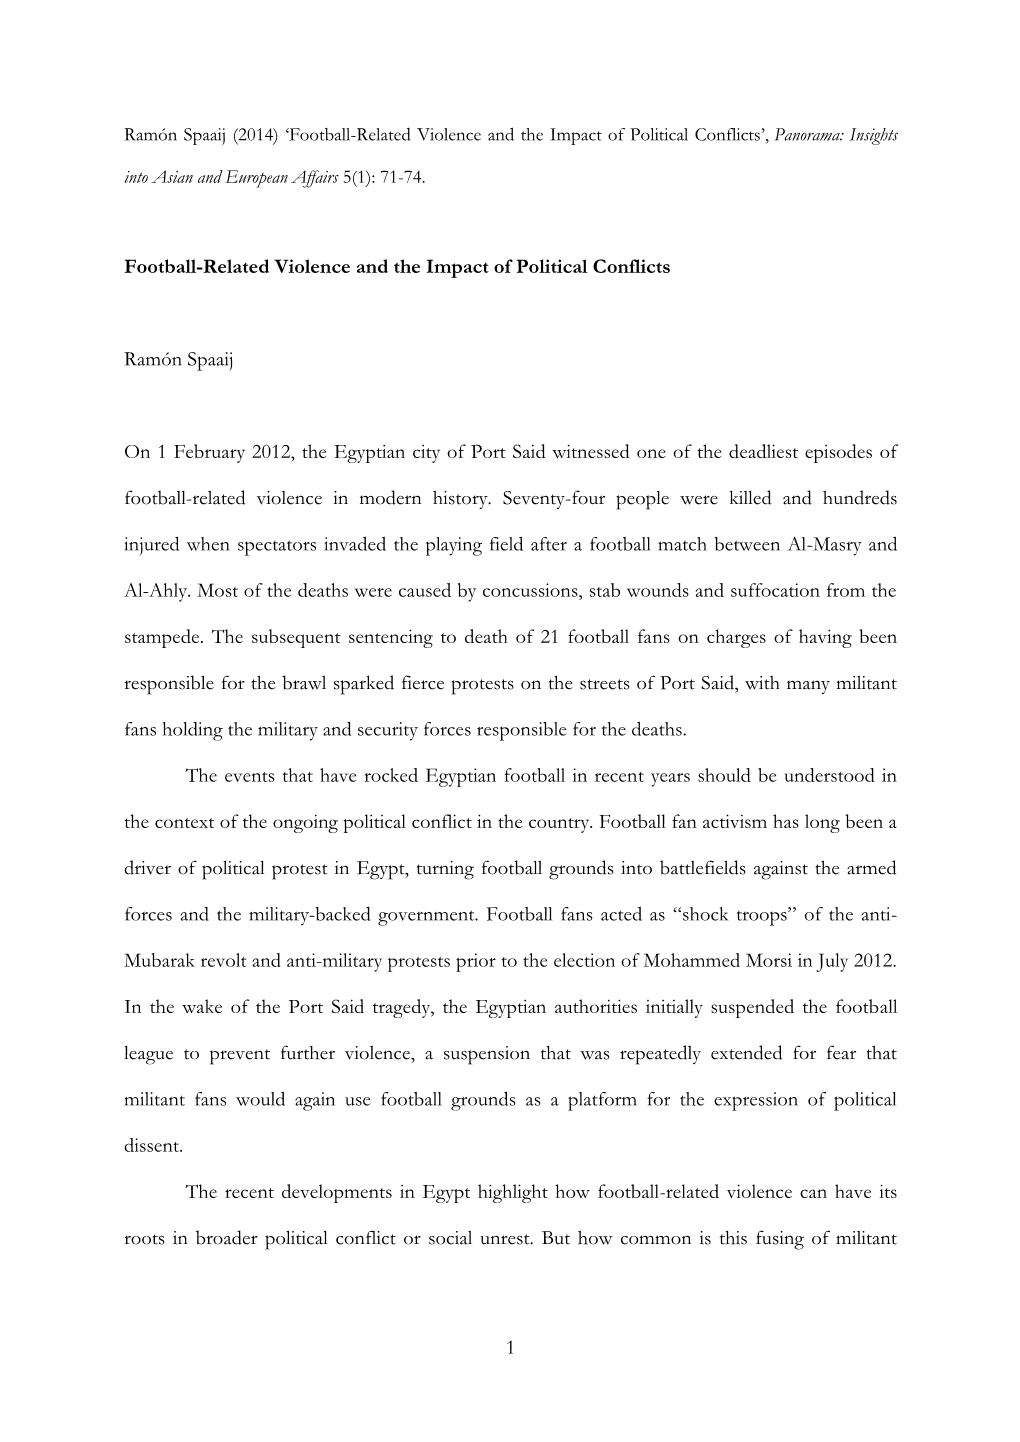 Football-Related Violence and the Impact of Political Conflicts’, Panorama: Insights Into Asian and European Affairs 5(1): 71-74